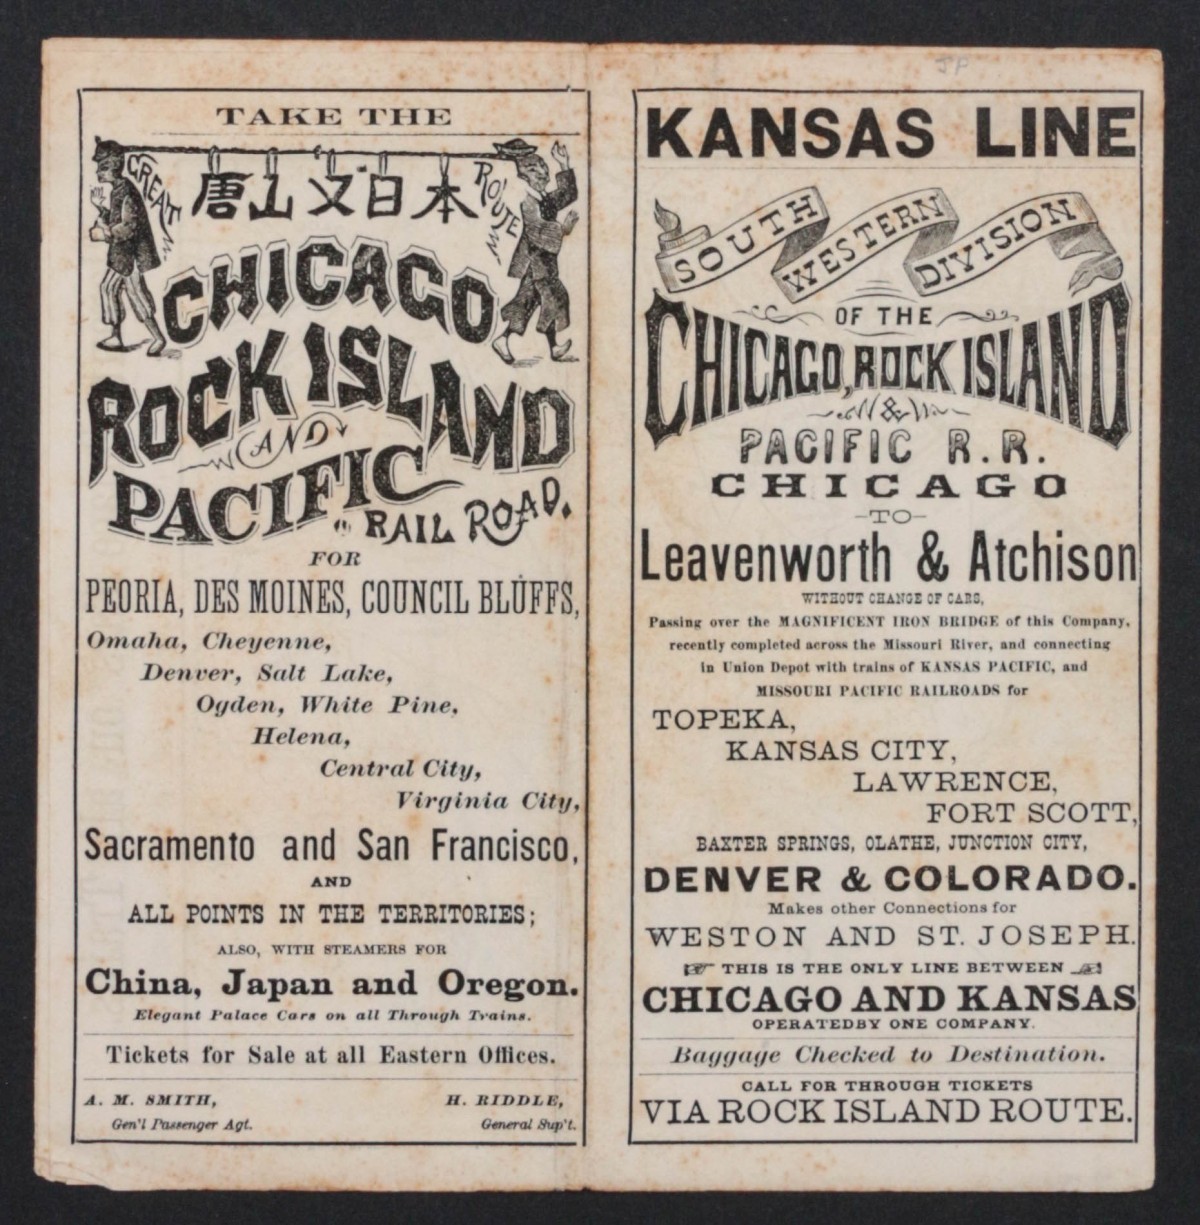 CHICAGO ROCK ISLAND & PACIFIC RR TIMETABLE, NO DATE